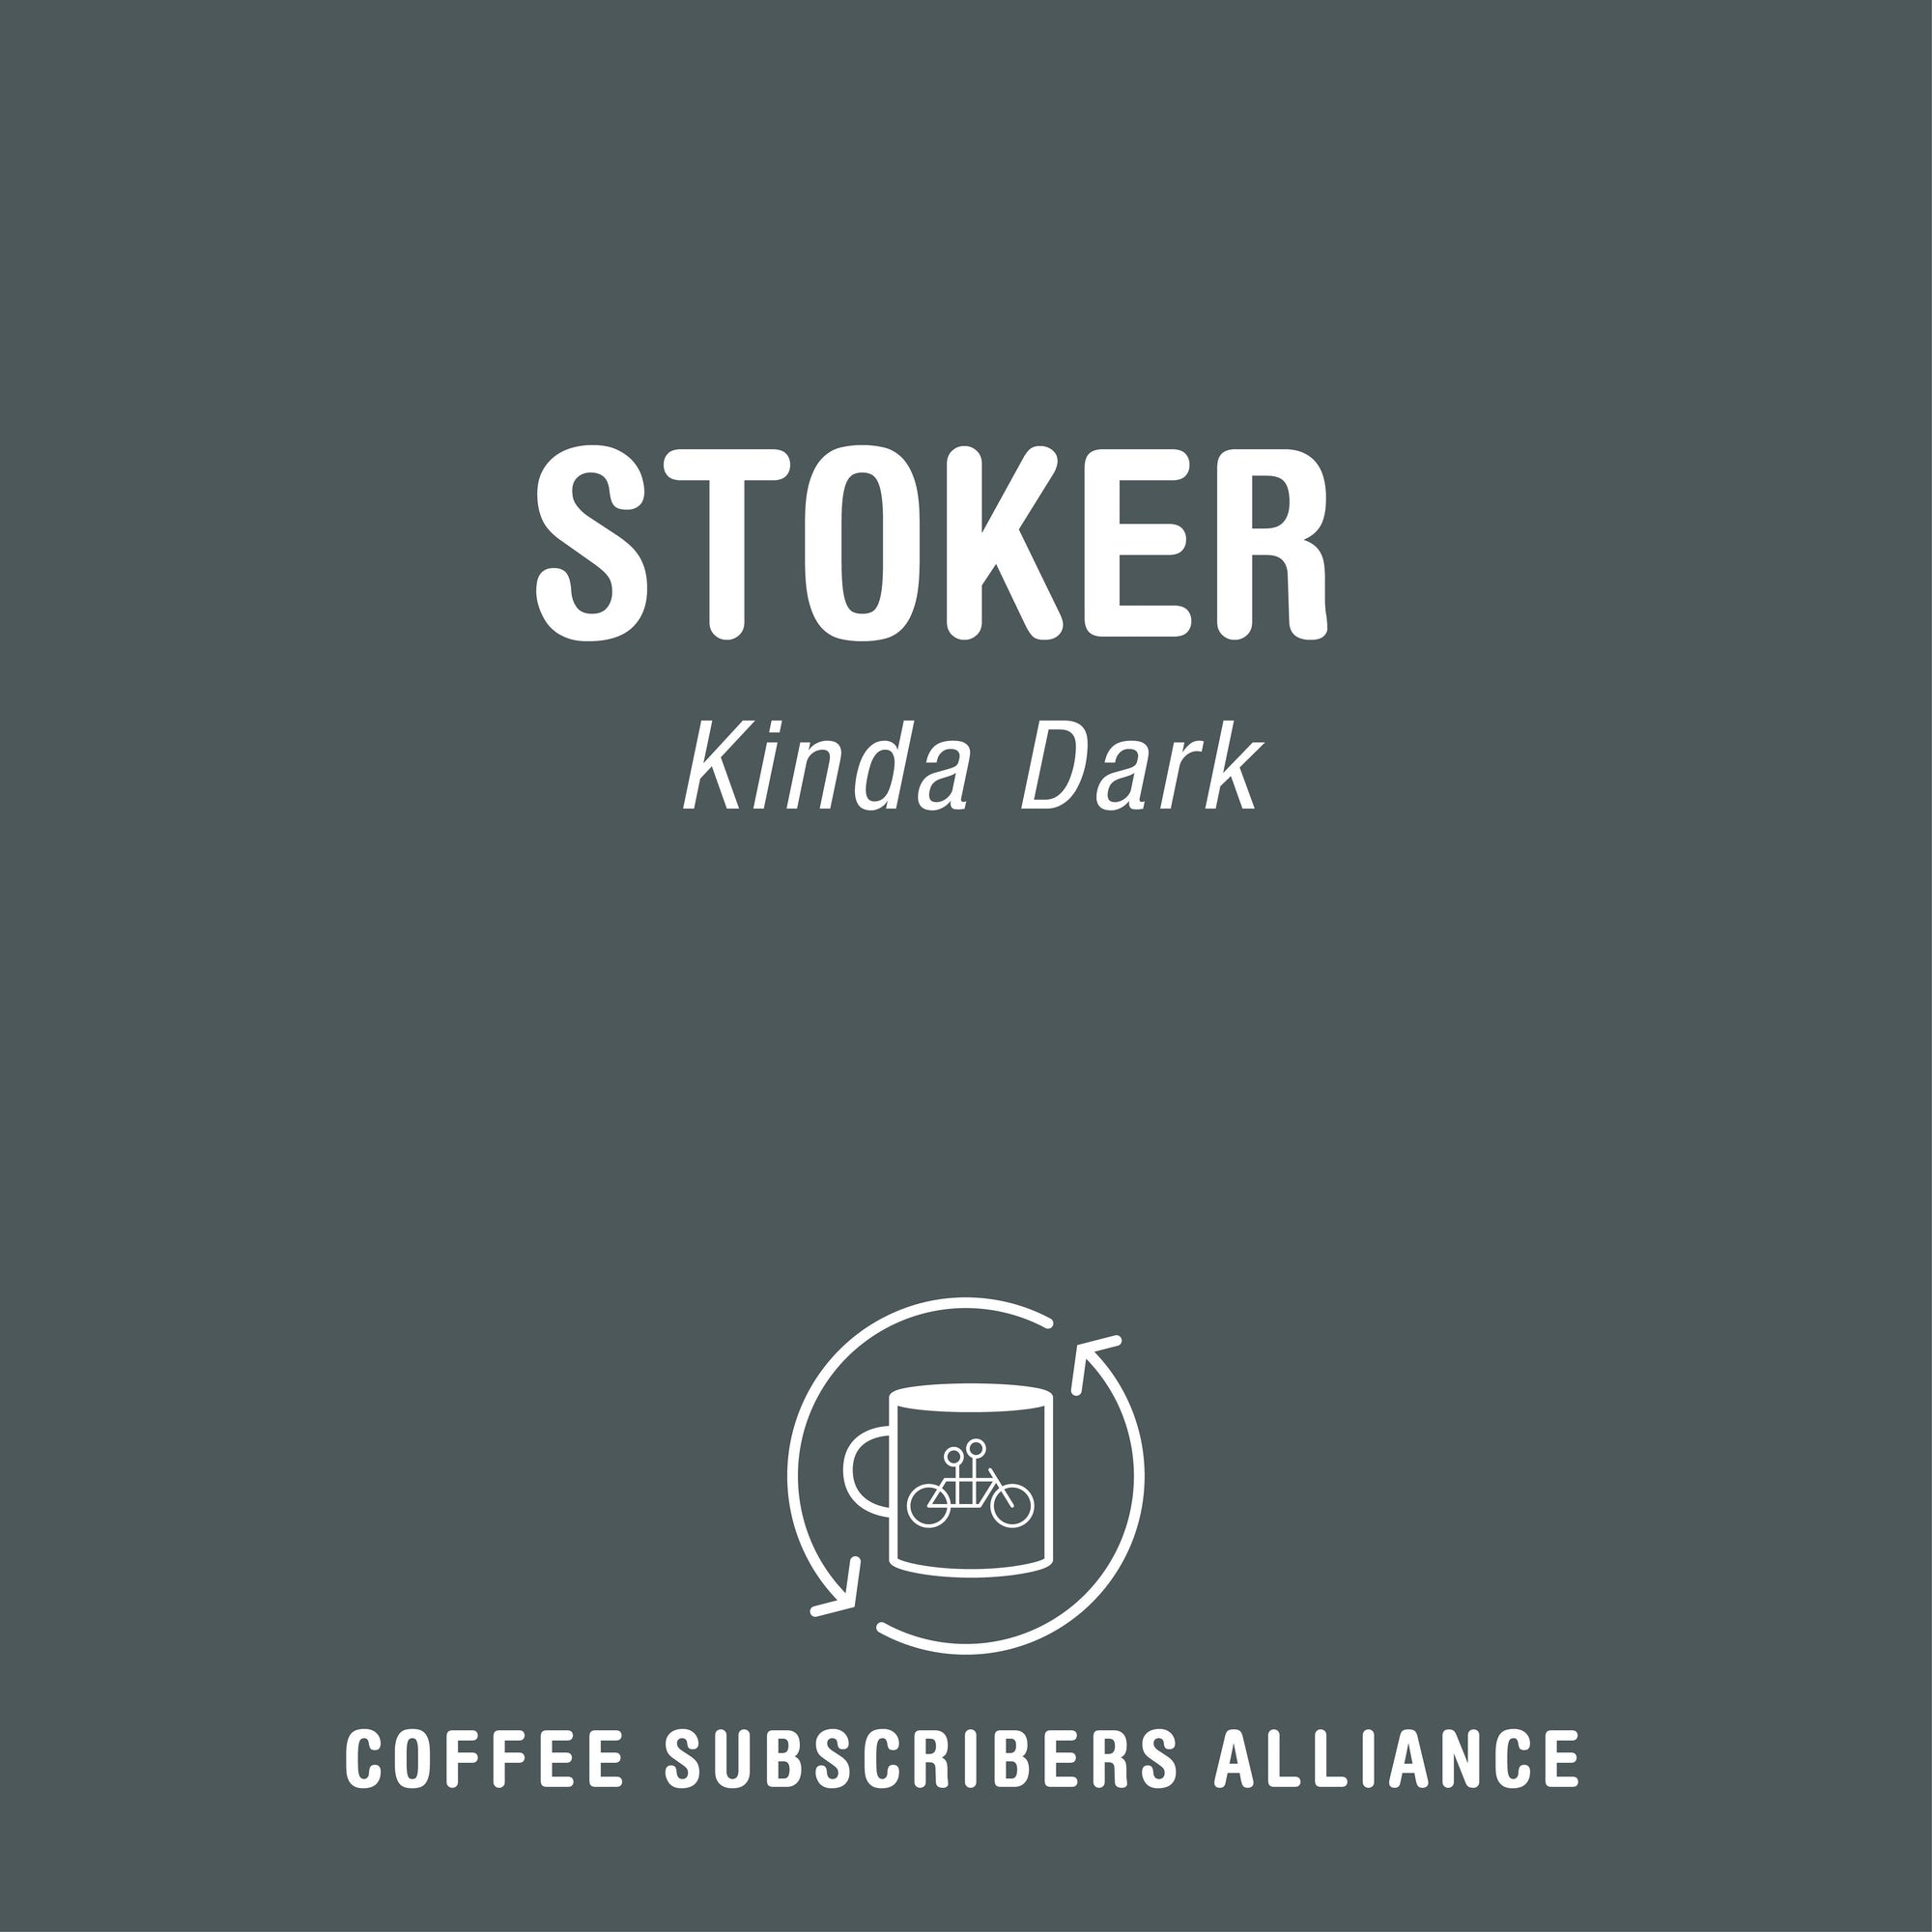 Logo of Tandem Coffee Roasters' Stoker Subscription featuring the text "kinda dark" with a stylized coffee cup and bike graphic on a gray background.